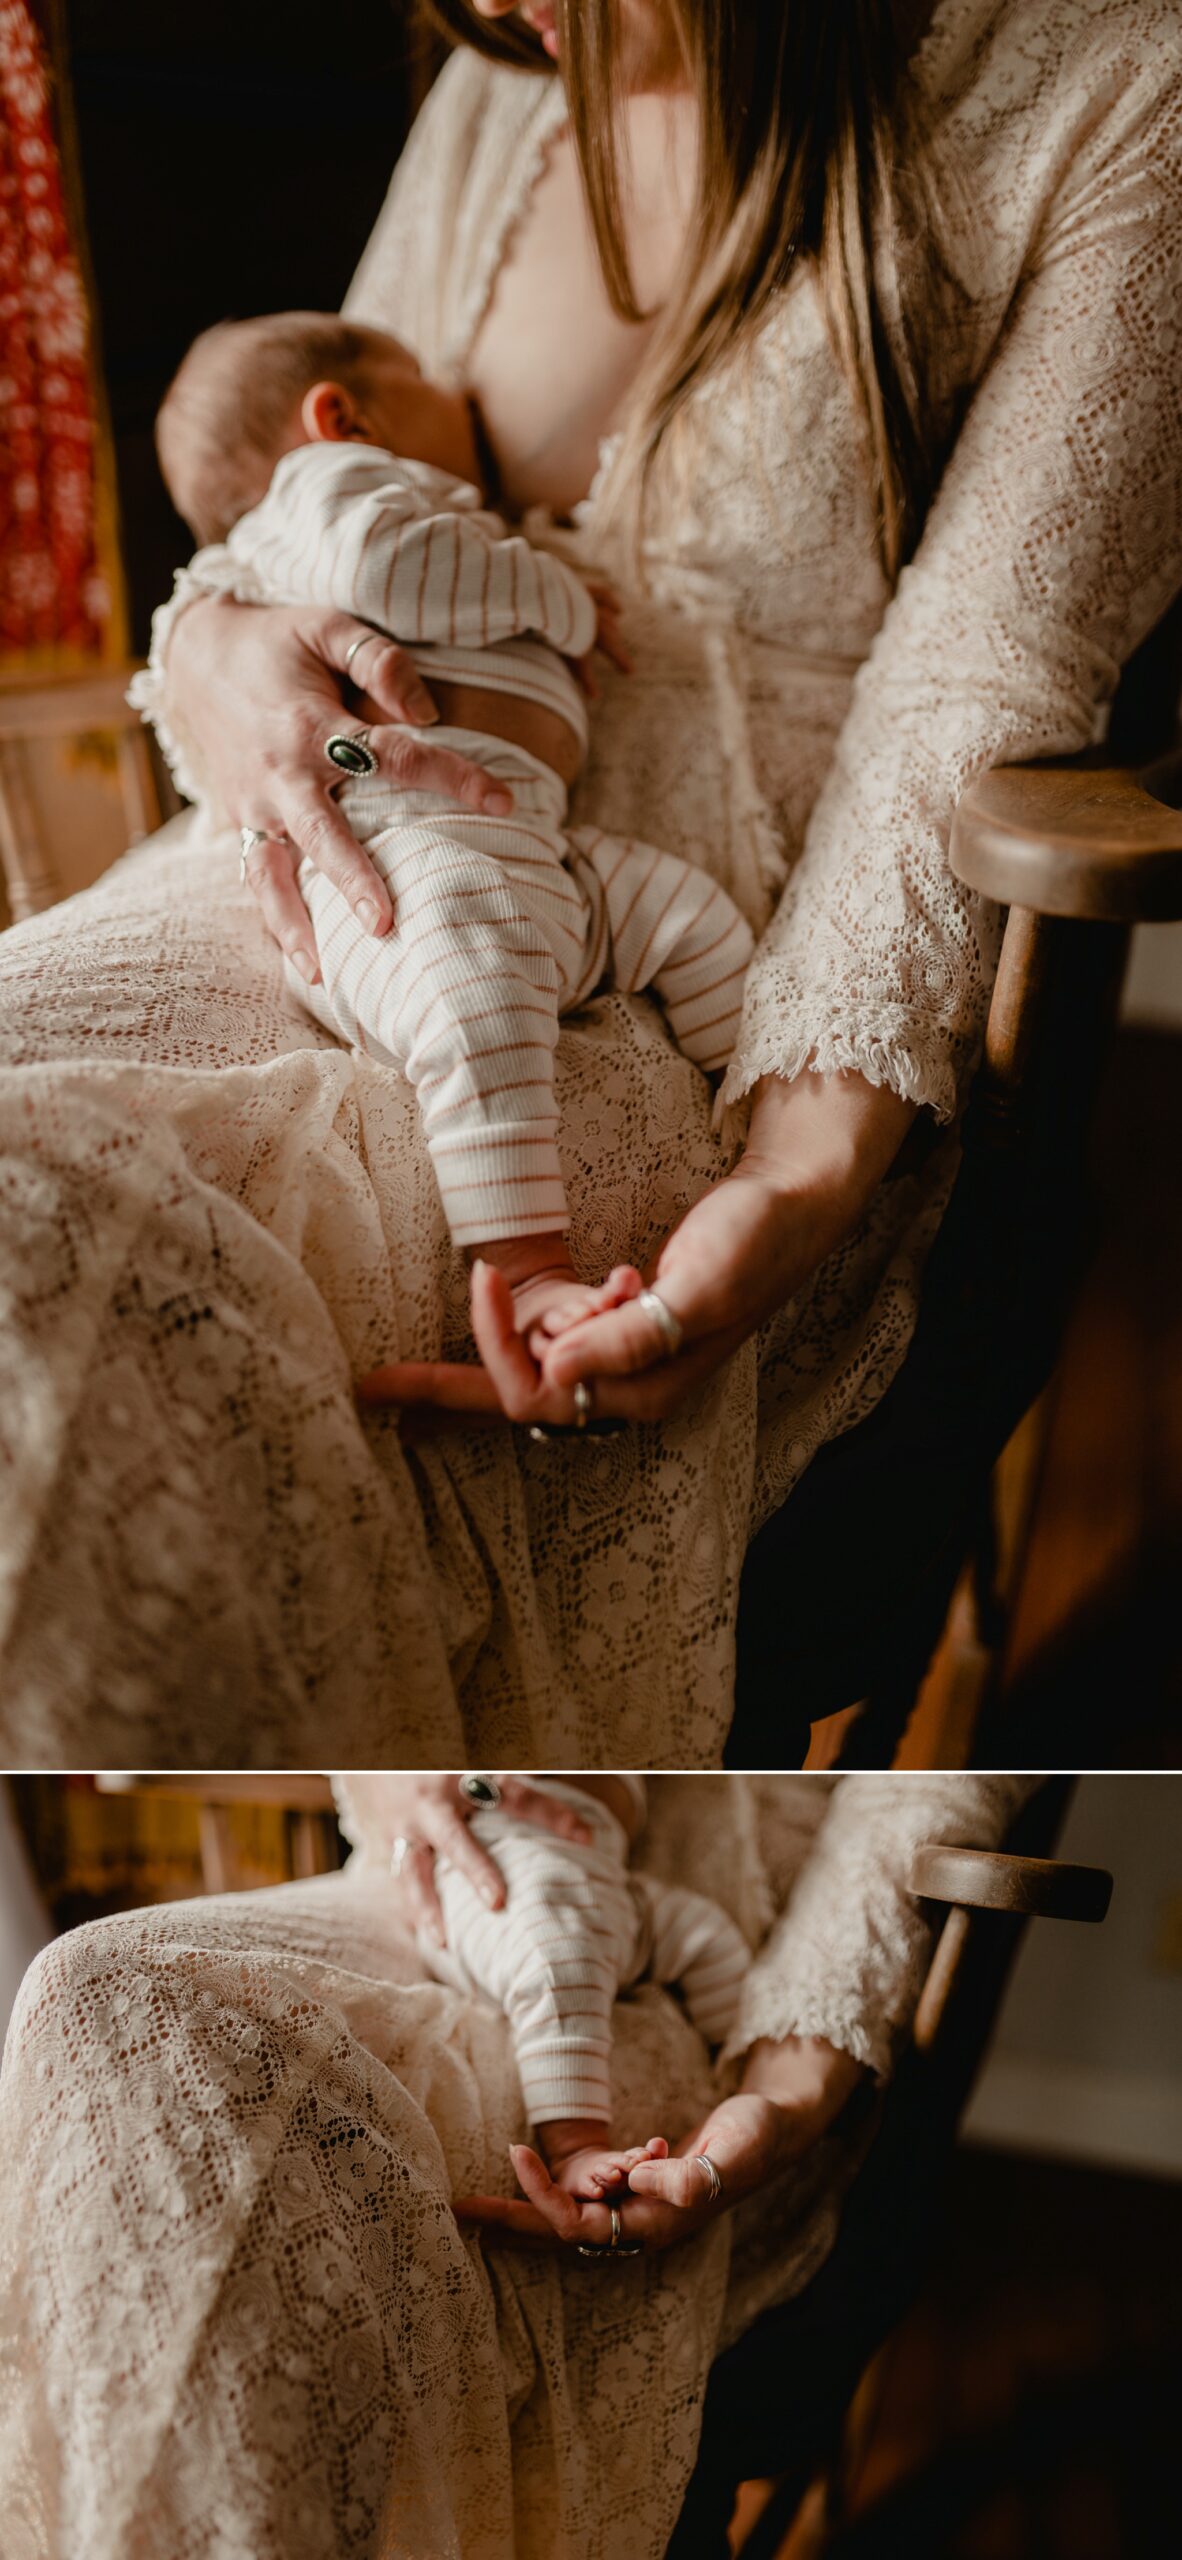 mom in a cream lace dress caresses baby boy's toes while she nurses him in a rocking chair